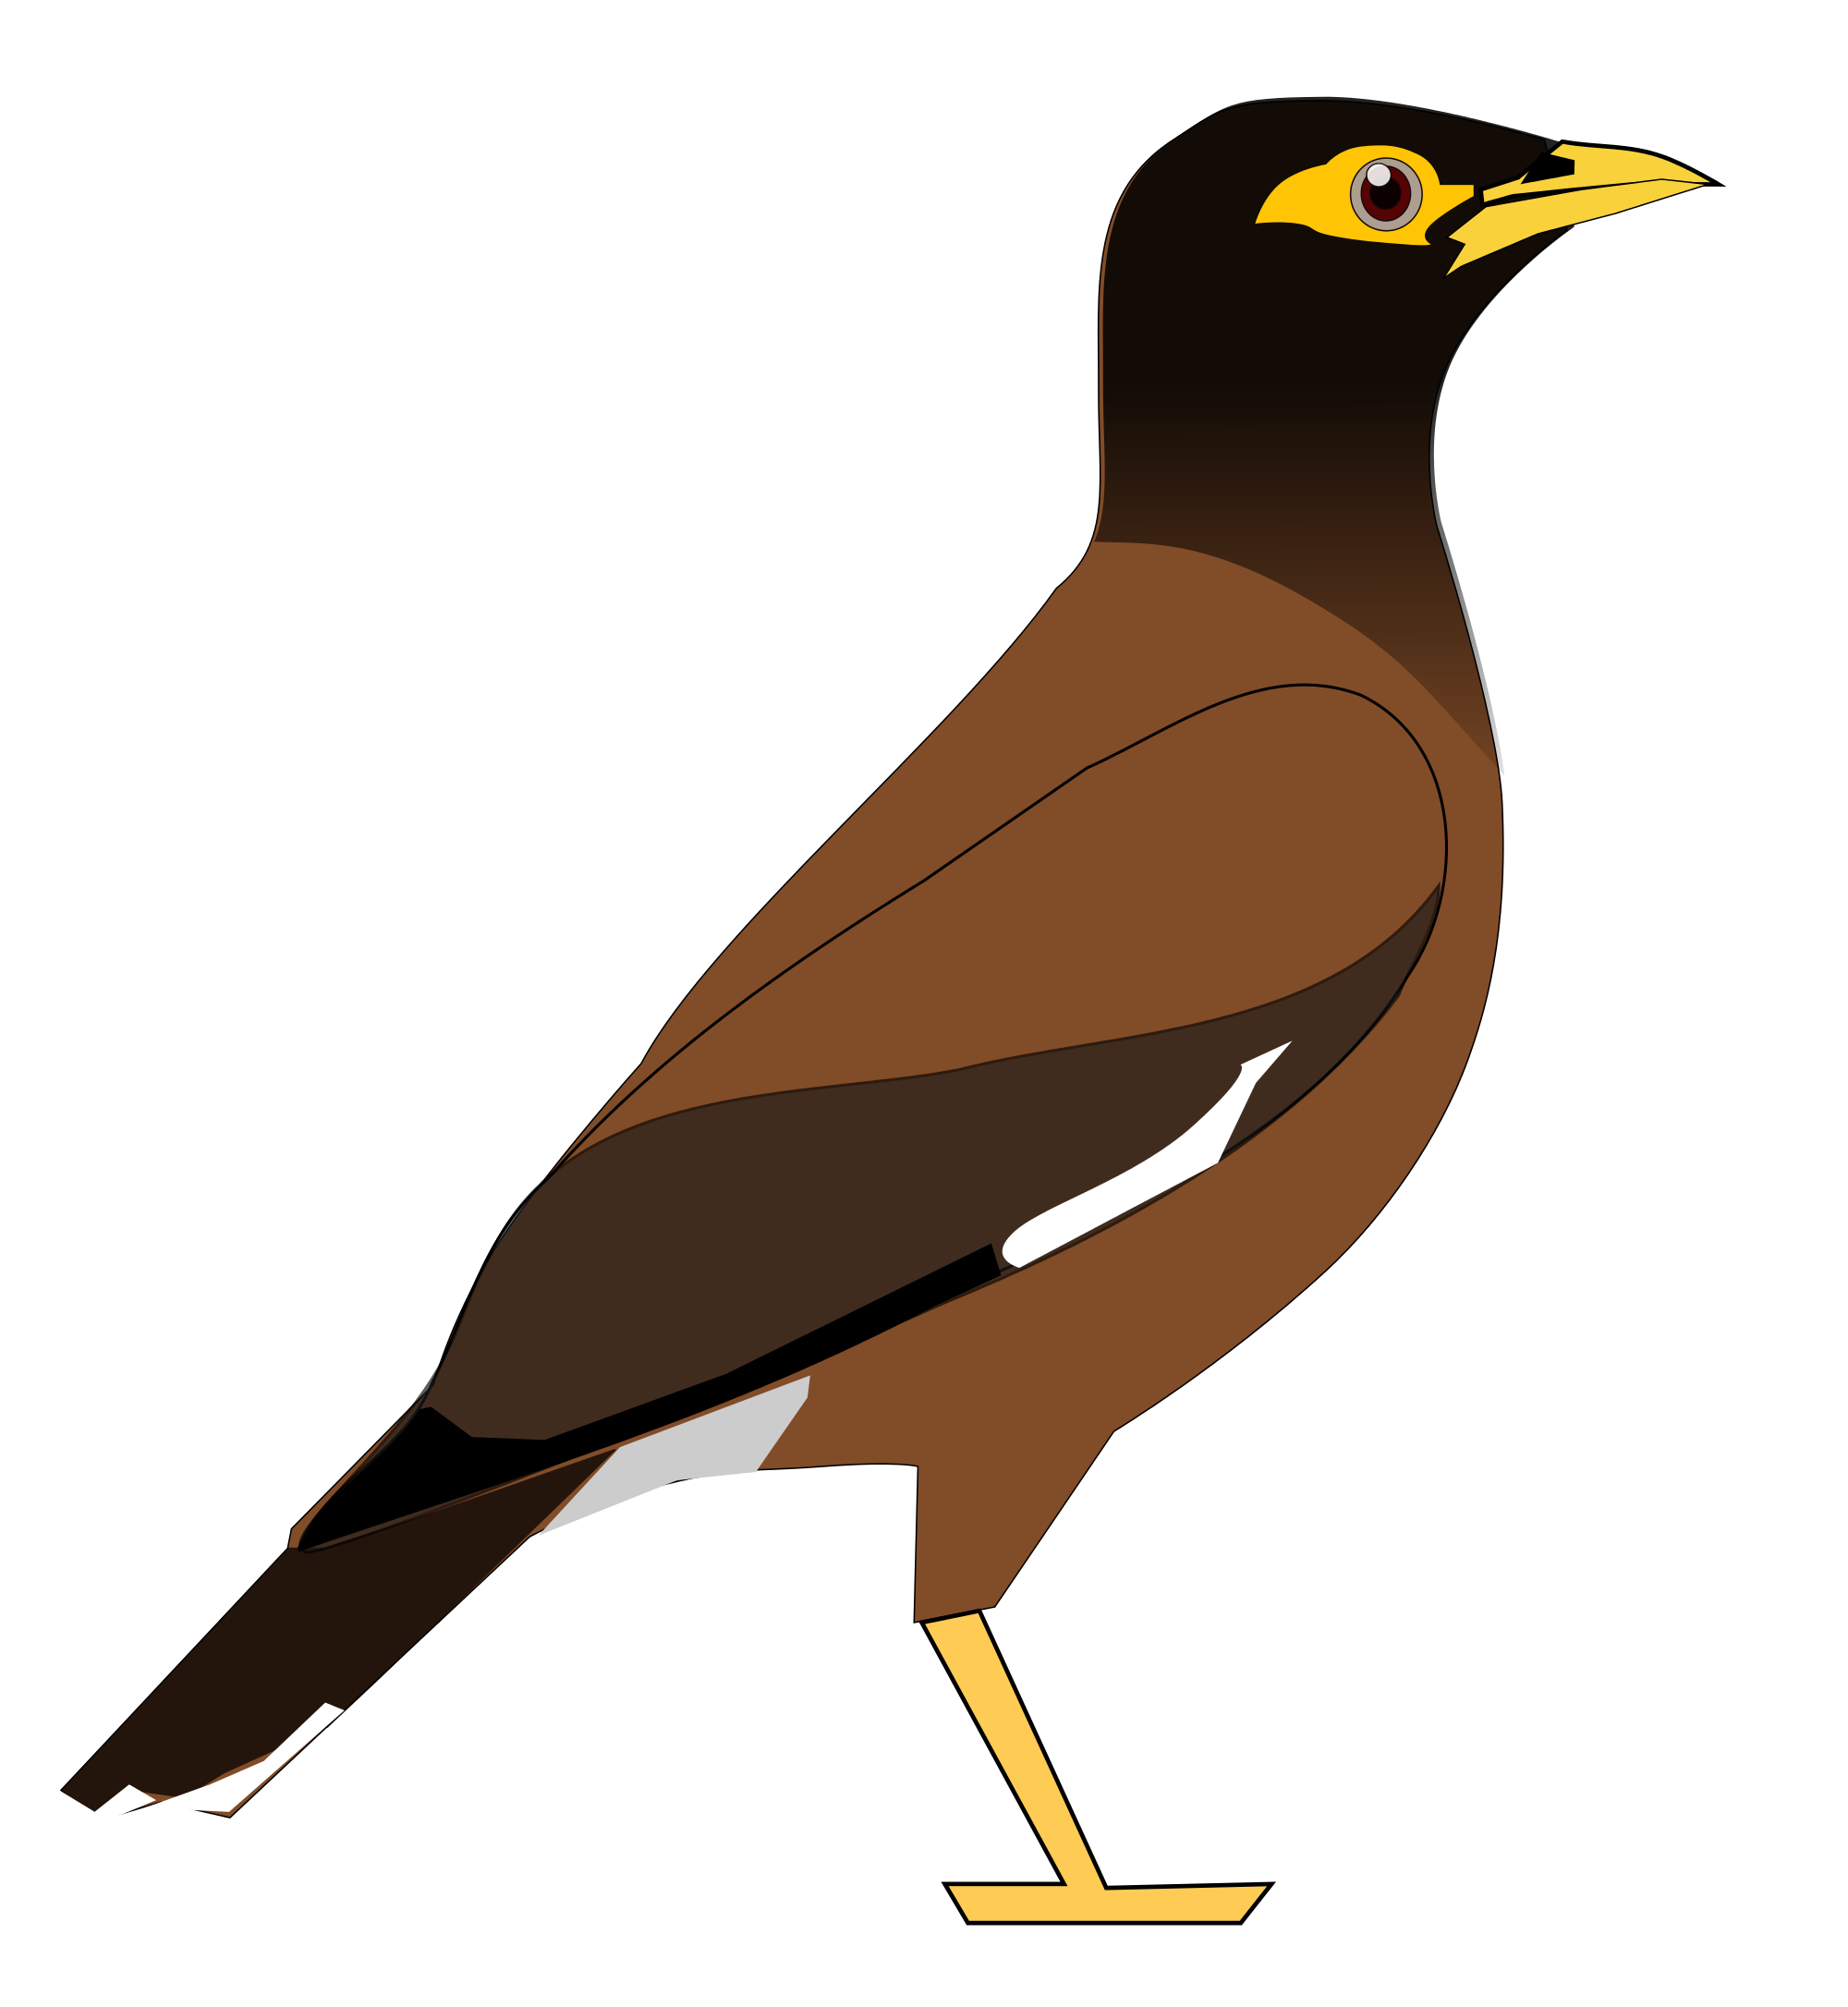 Common Myna clipart #1, Download drawings